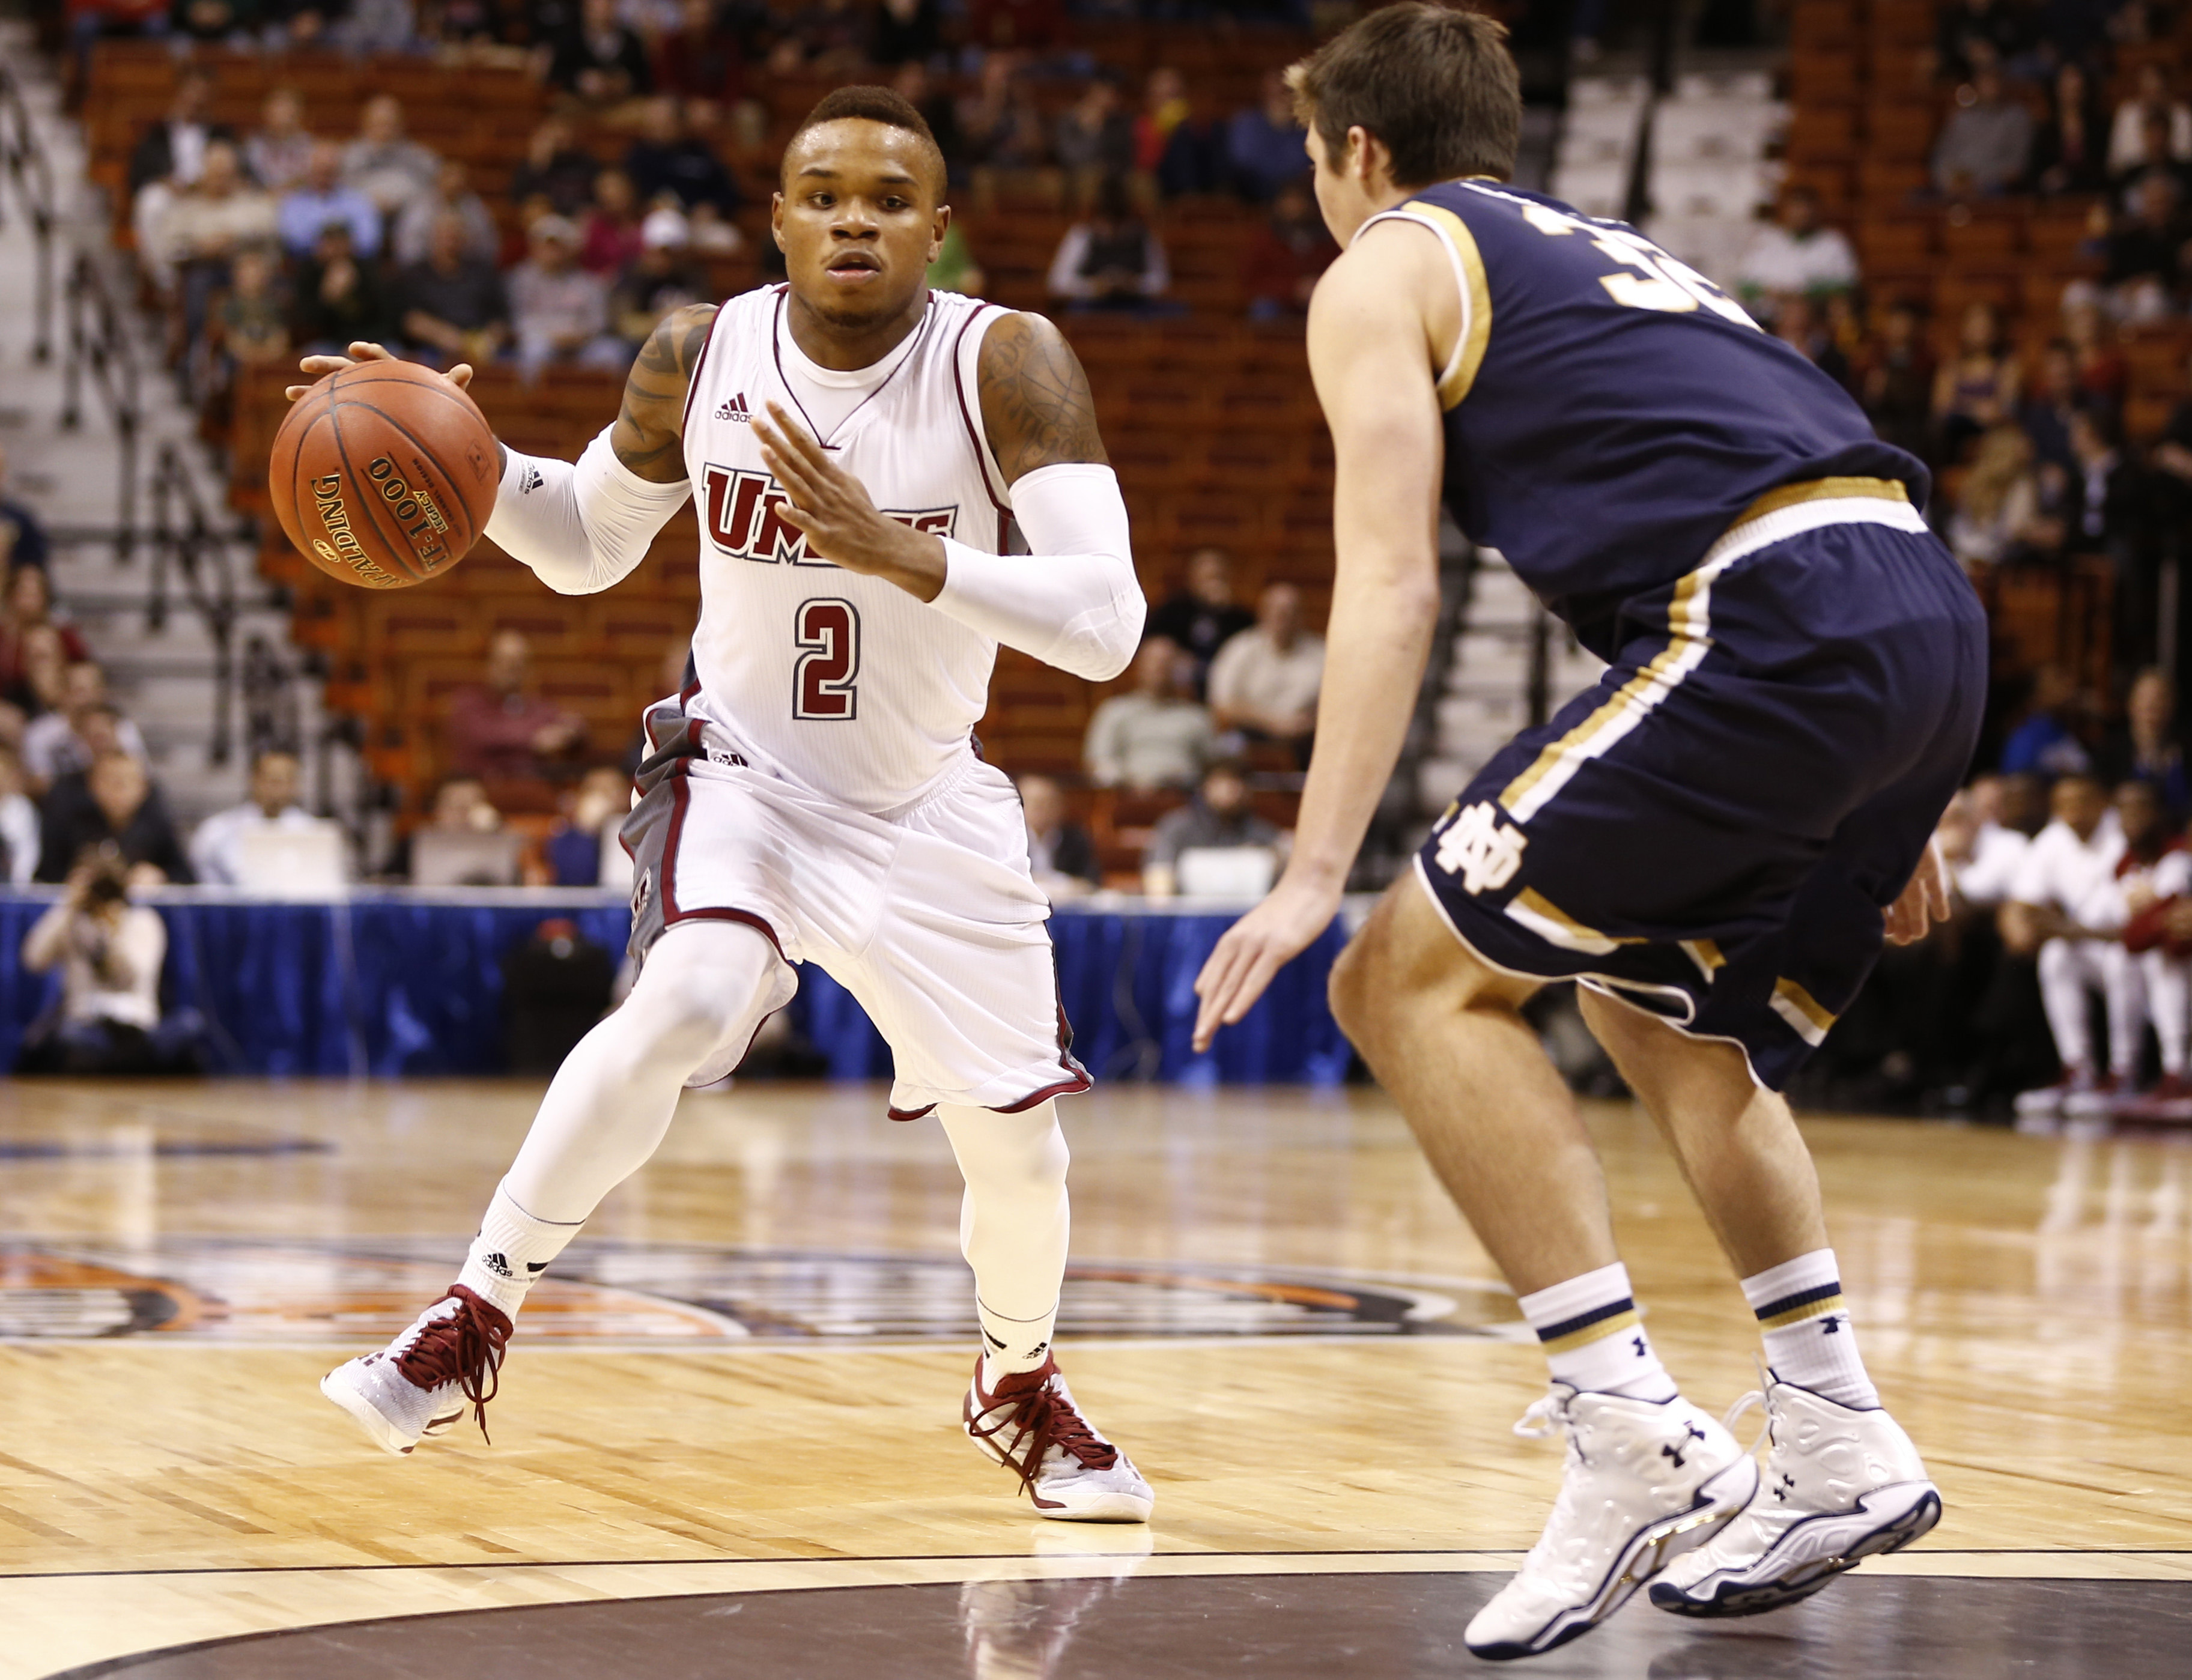 Derrick Gordon changed the culture of the UMass basketball locker room simply by coming out.